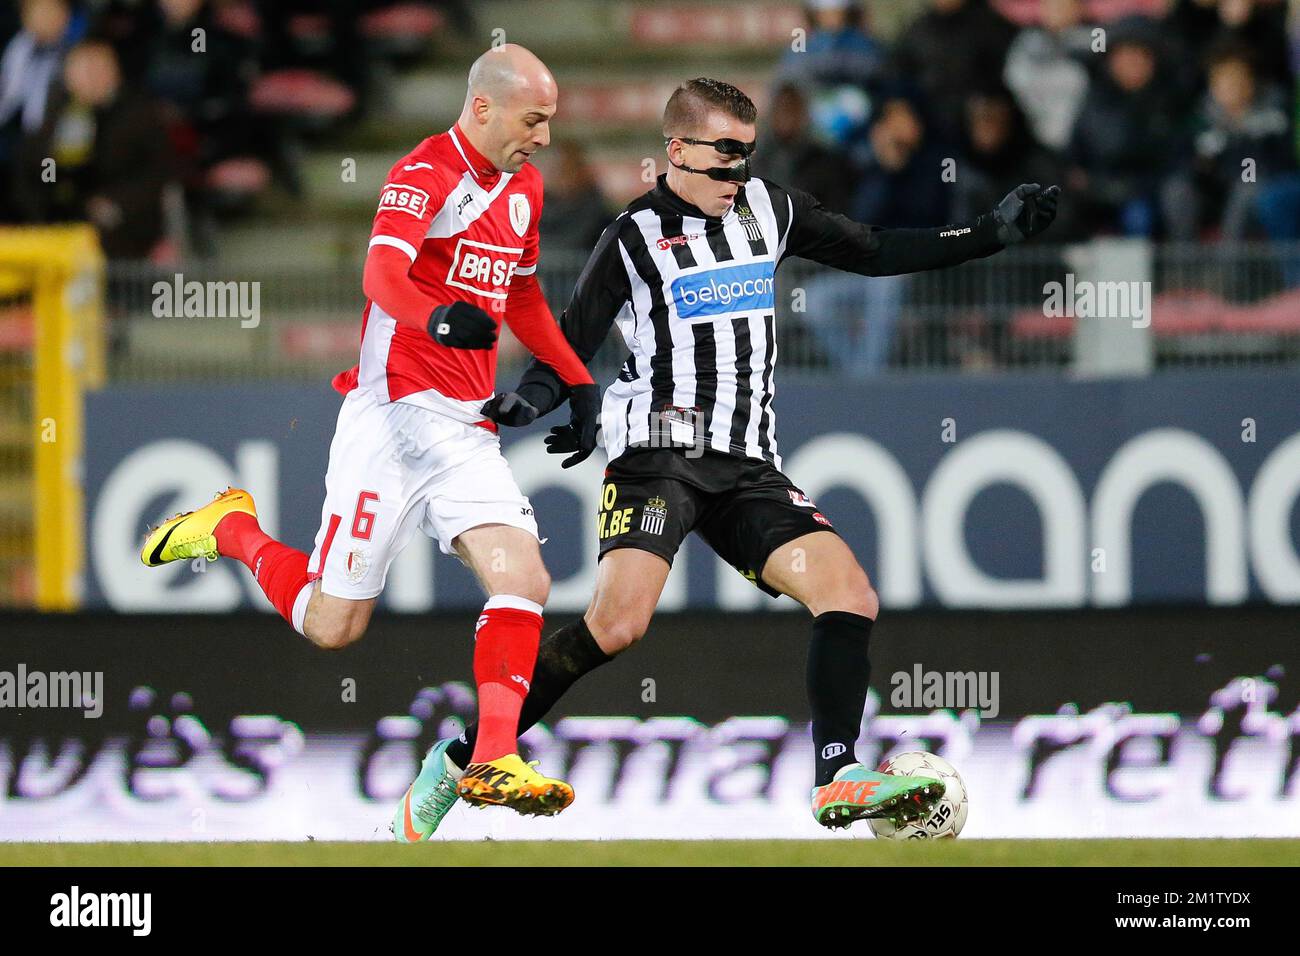 20140215 - CHARLEROI, BELGIUM: Standard's Laurent Ciman and Charleroi's Clement Tainmont fight for the ball during the Jupiler Pro League match between Sporting Charleroi and Standard de Liege, in Charleroi, Saturday 15 February 2014, on day 26 of the Belgian soccer championship. BELGA PHOTO BRUNO FAHY Stock Photo